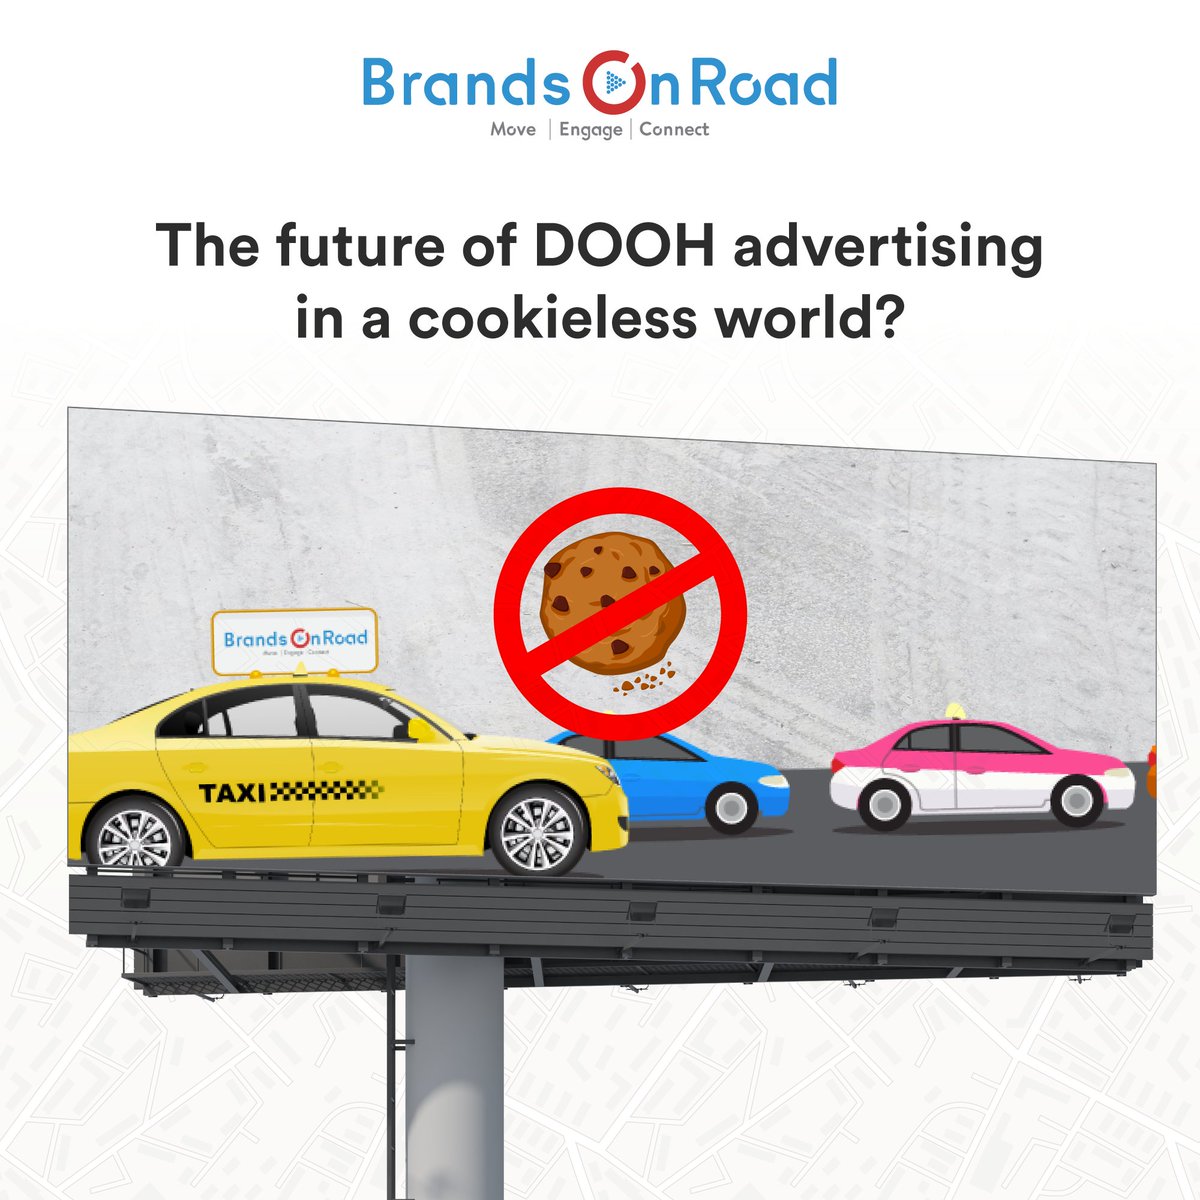 The cancellation of support to third-party cookies will change the way advertisers target audiences. But it might unlock potential opportunities for DOOH advertising. 

Read here: brandsonroad.com/the-future-of-…

#BrandsOnRoad #DOOH #cookieless #cookielessadvertising #advertising